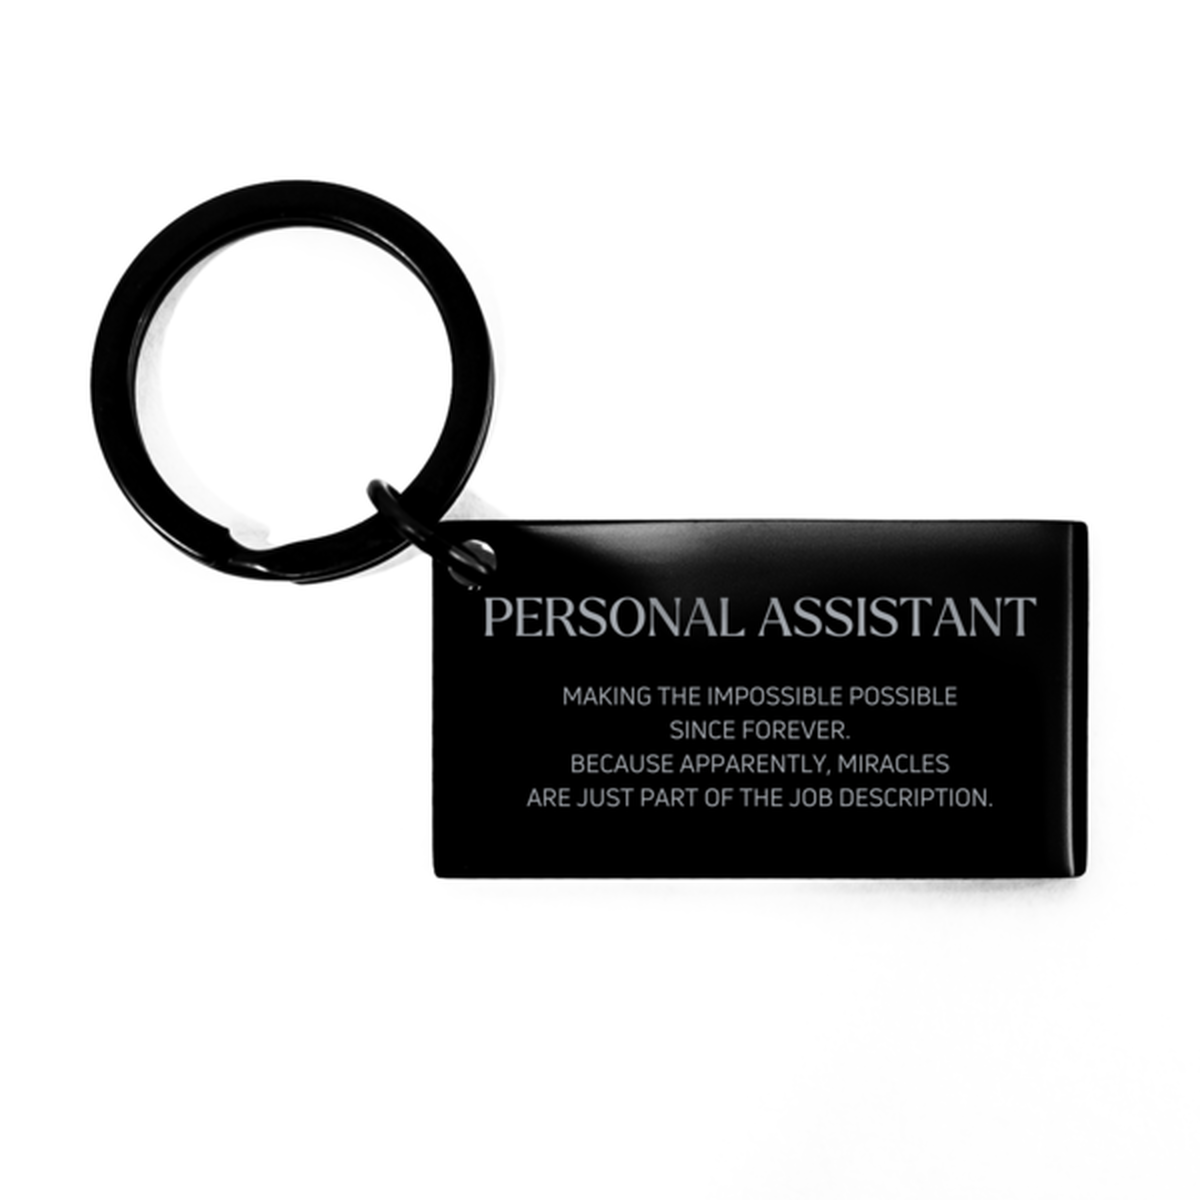 Funny Personal Assistant Gifts, Miracles are just part of the job description, Inspirational Birthday Keychain For Personal Assistant, Men, Women, Coworkers, Friends, Boss